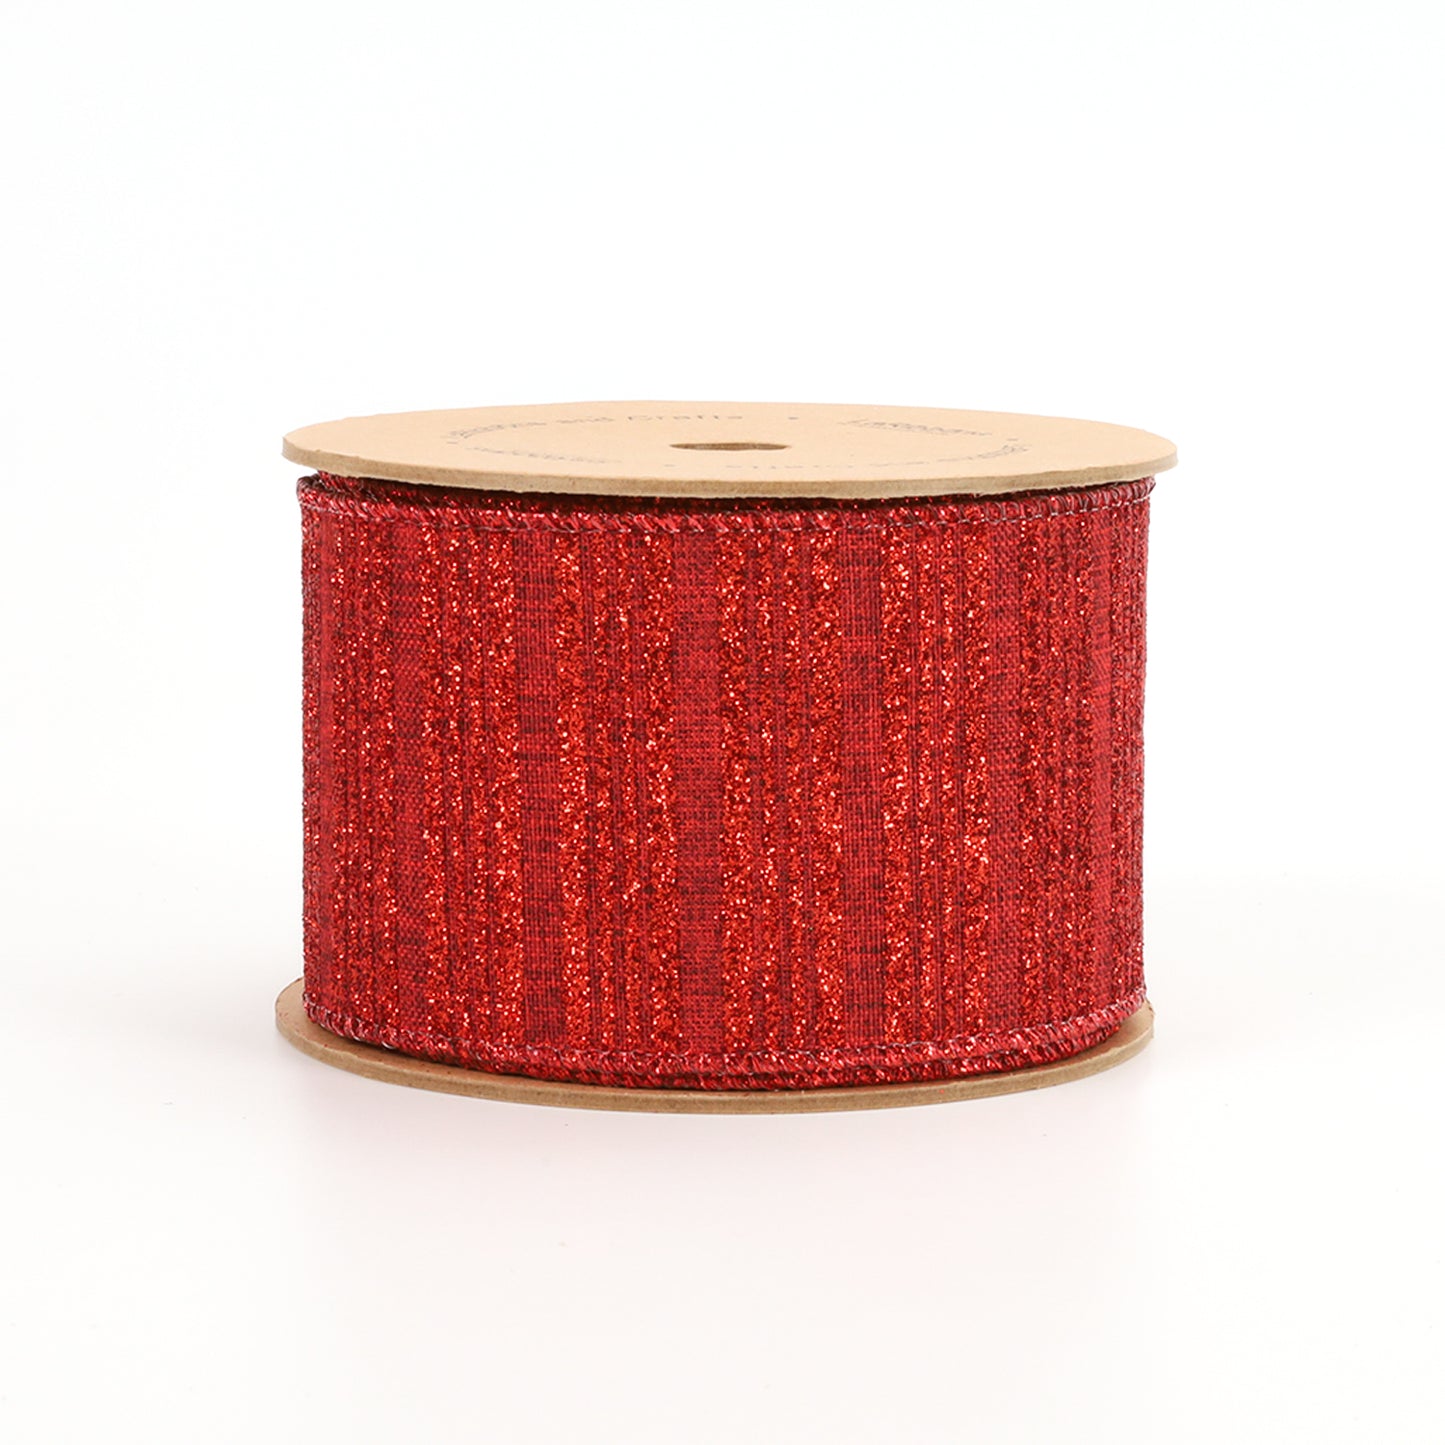 2 1/2" HOLIDAY WIRED RIBBON | "GLITTER STRIPED" CRANBERRY 10 YARD ROLL 6.3X915cm